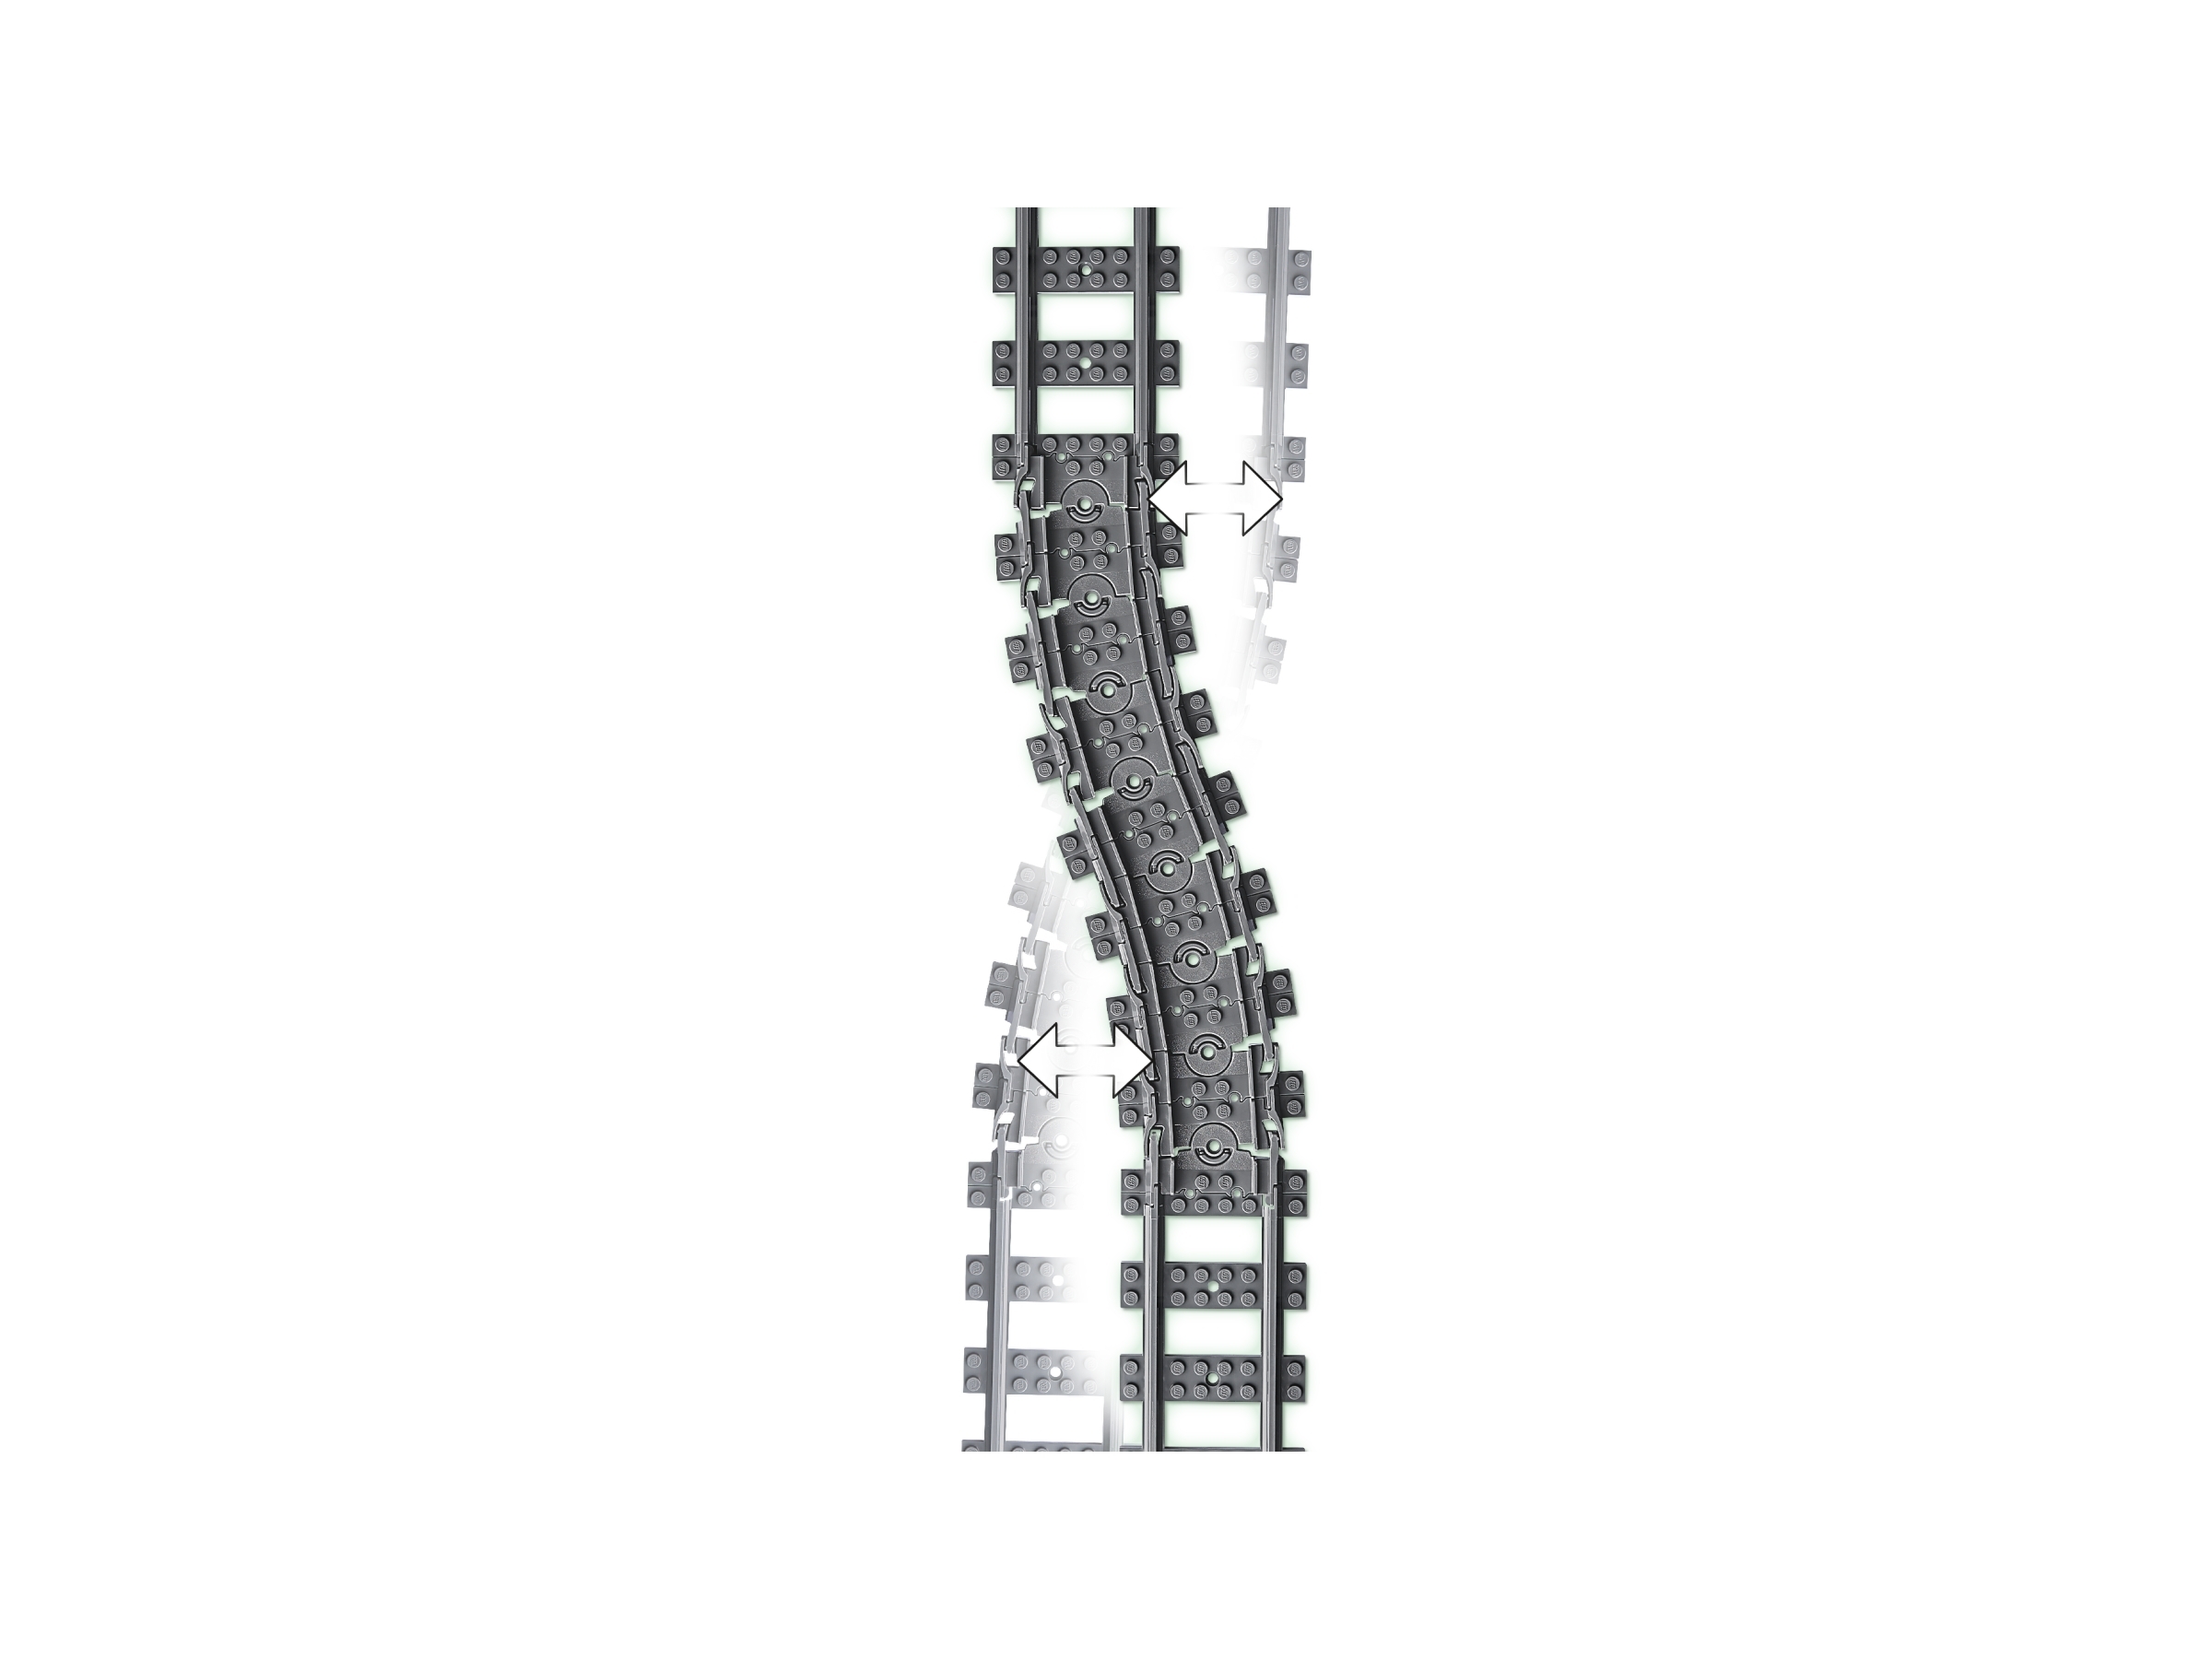 LEGO City Tracks 60205-20 Pieces Extension Accessory Set, Train Track and  Railway Expansion, Compatible with LEGO City Sets, Building Toy for Kids